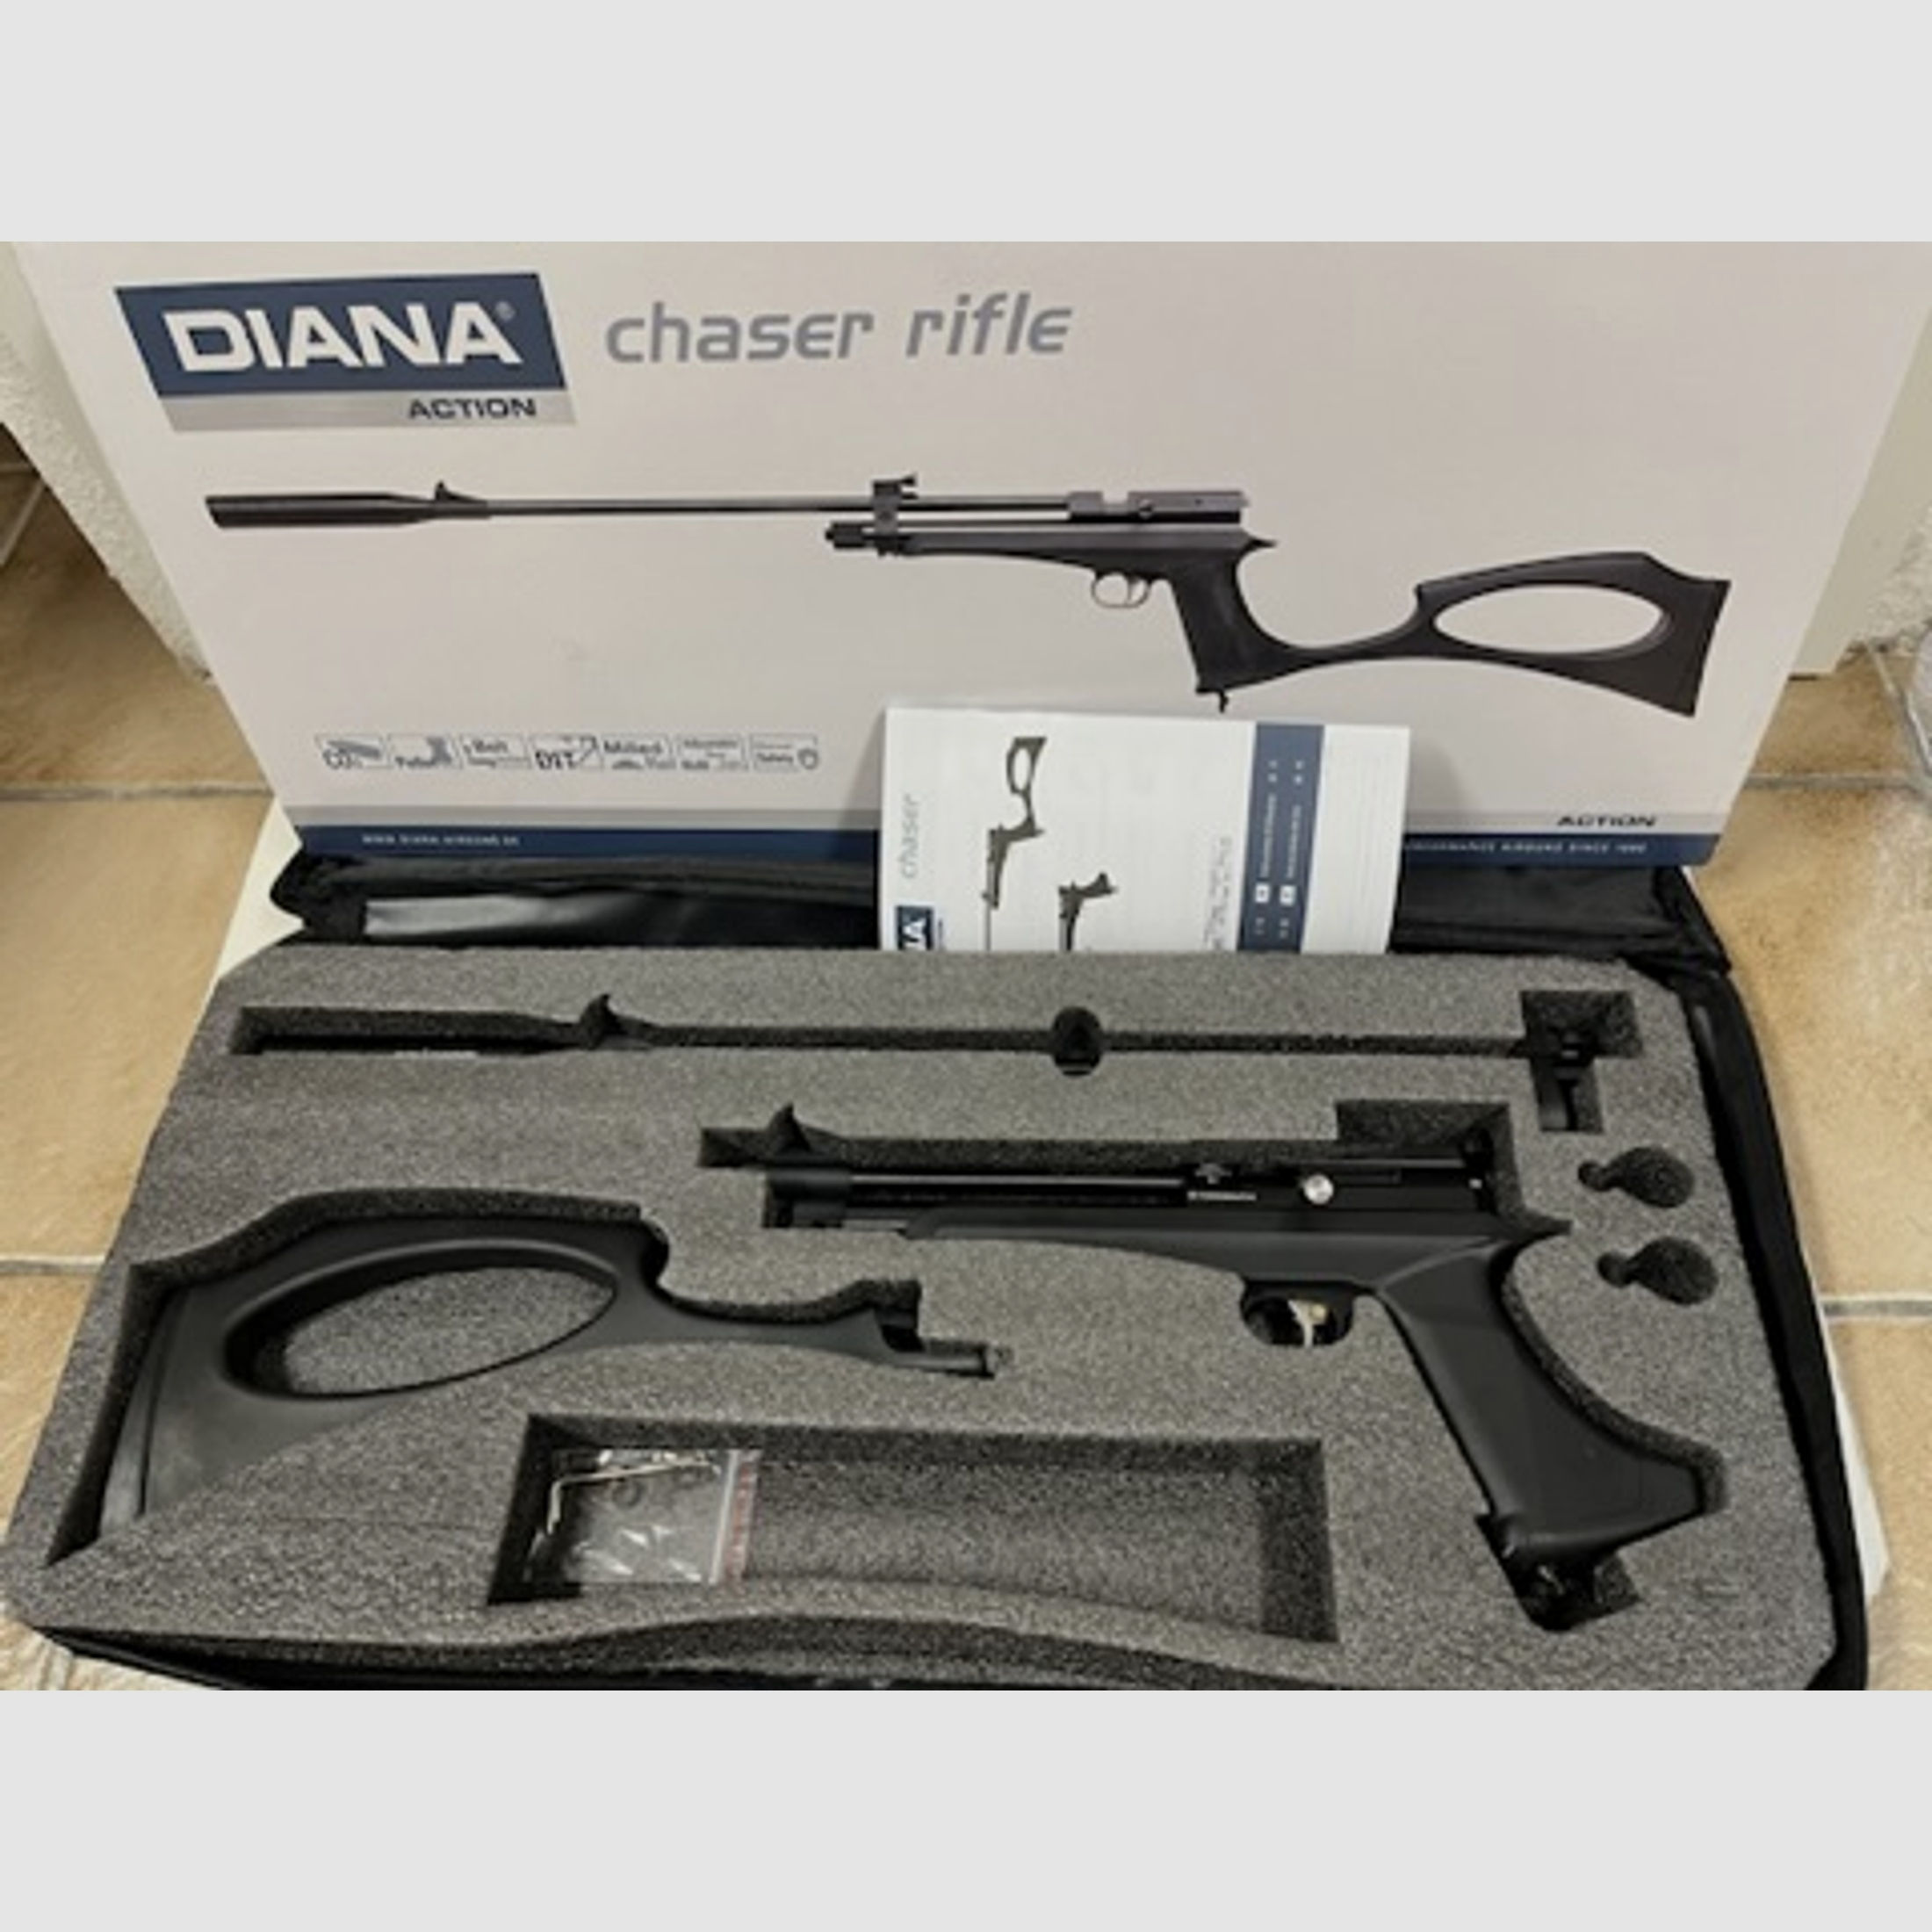 Diana Chaser Rifle